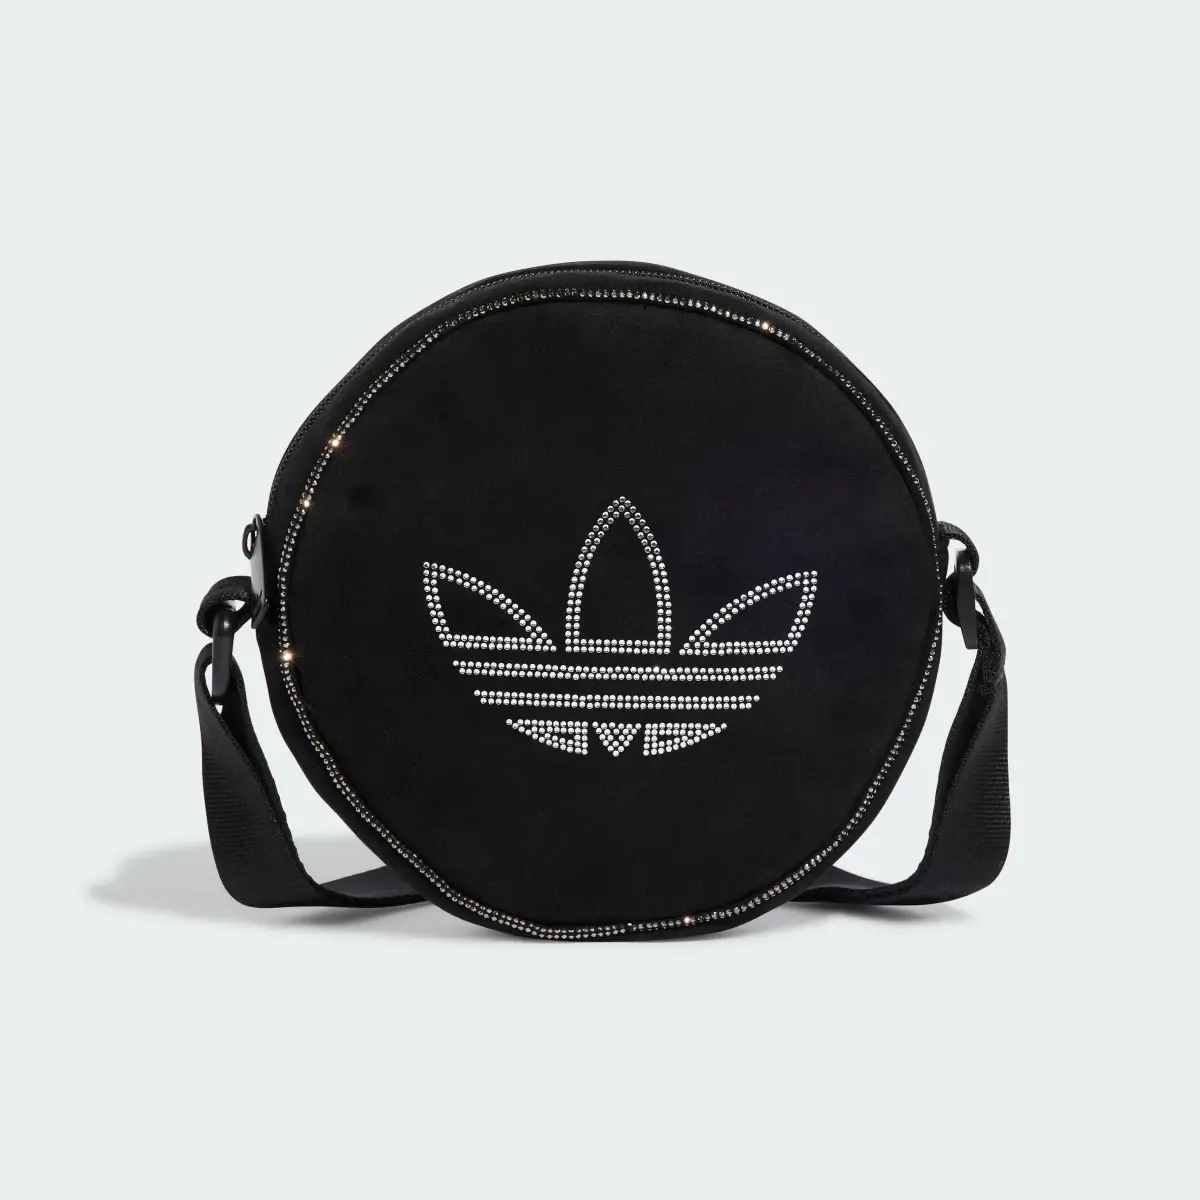 Adidas Sac rond matière synthétique strass. 2